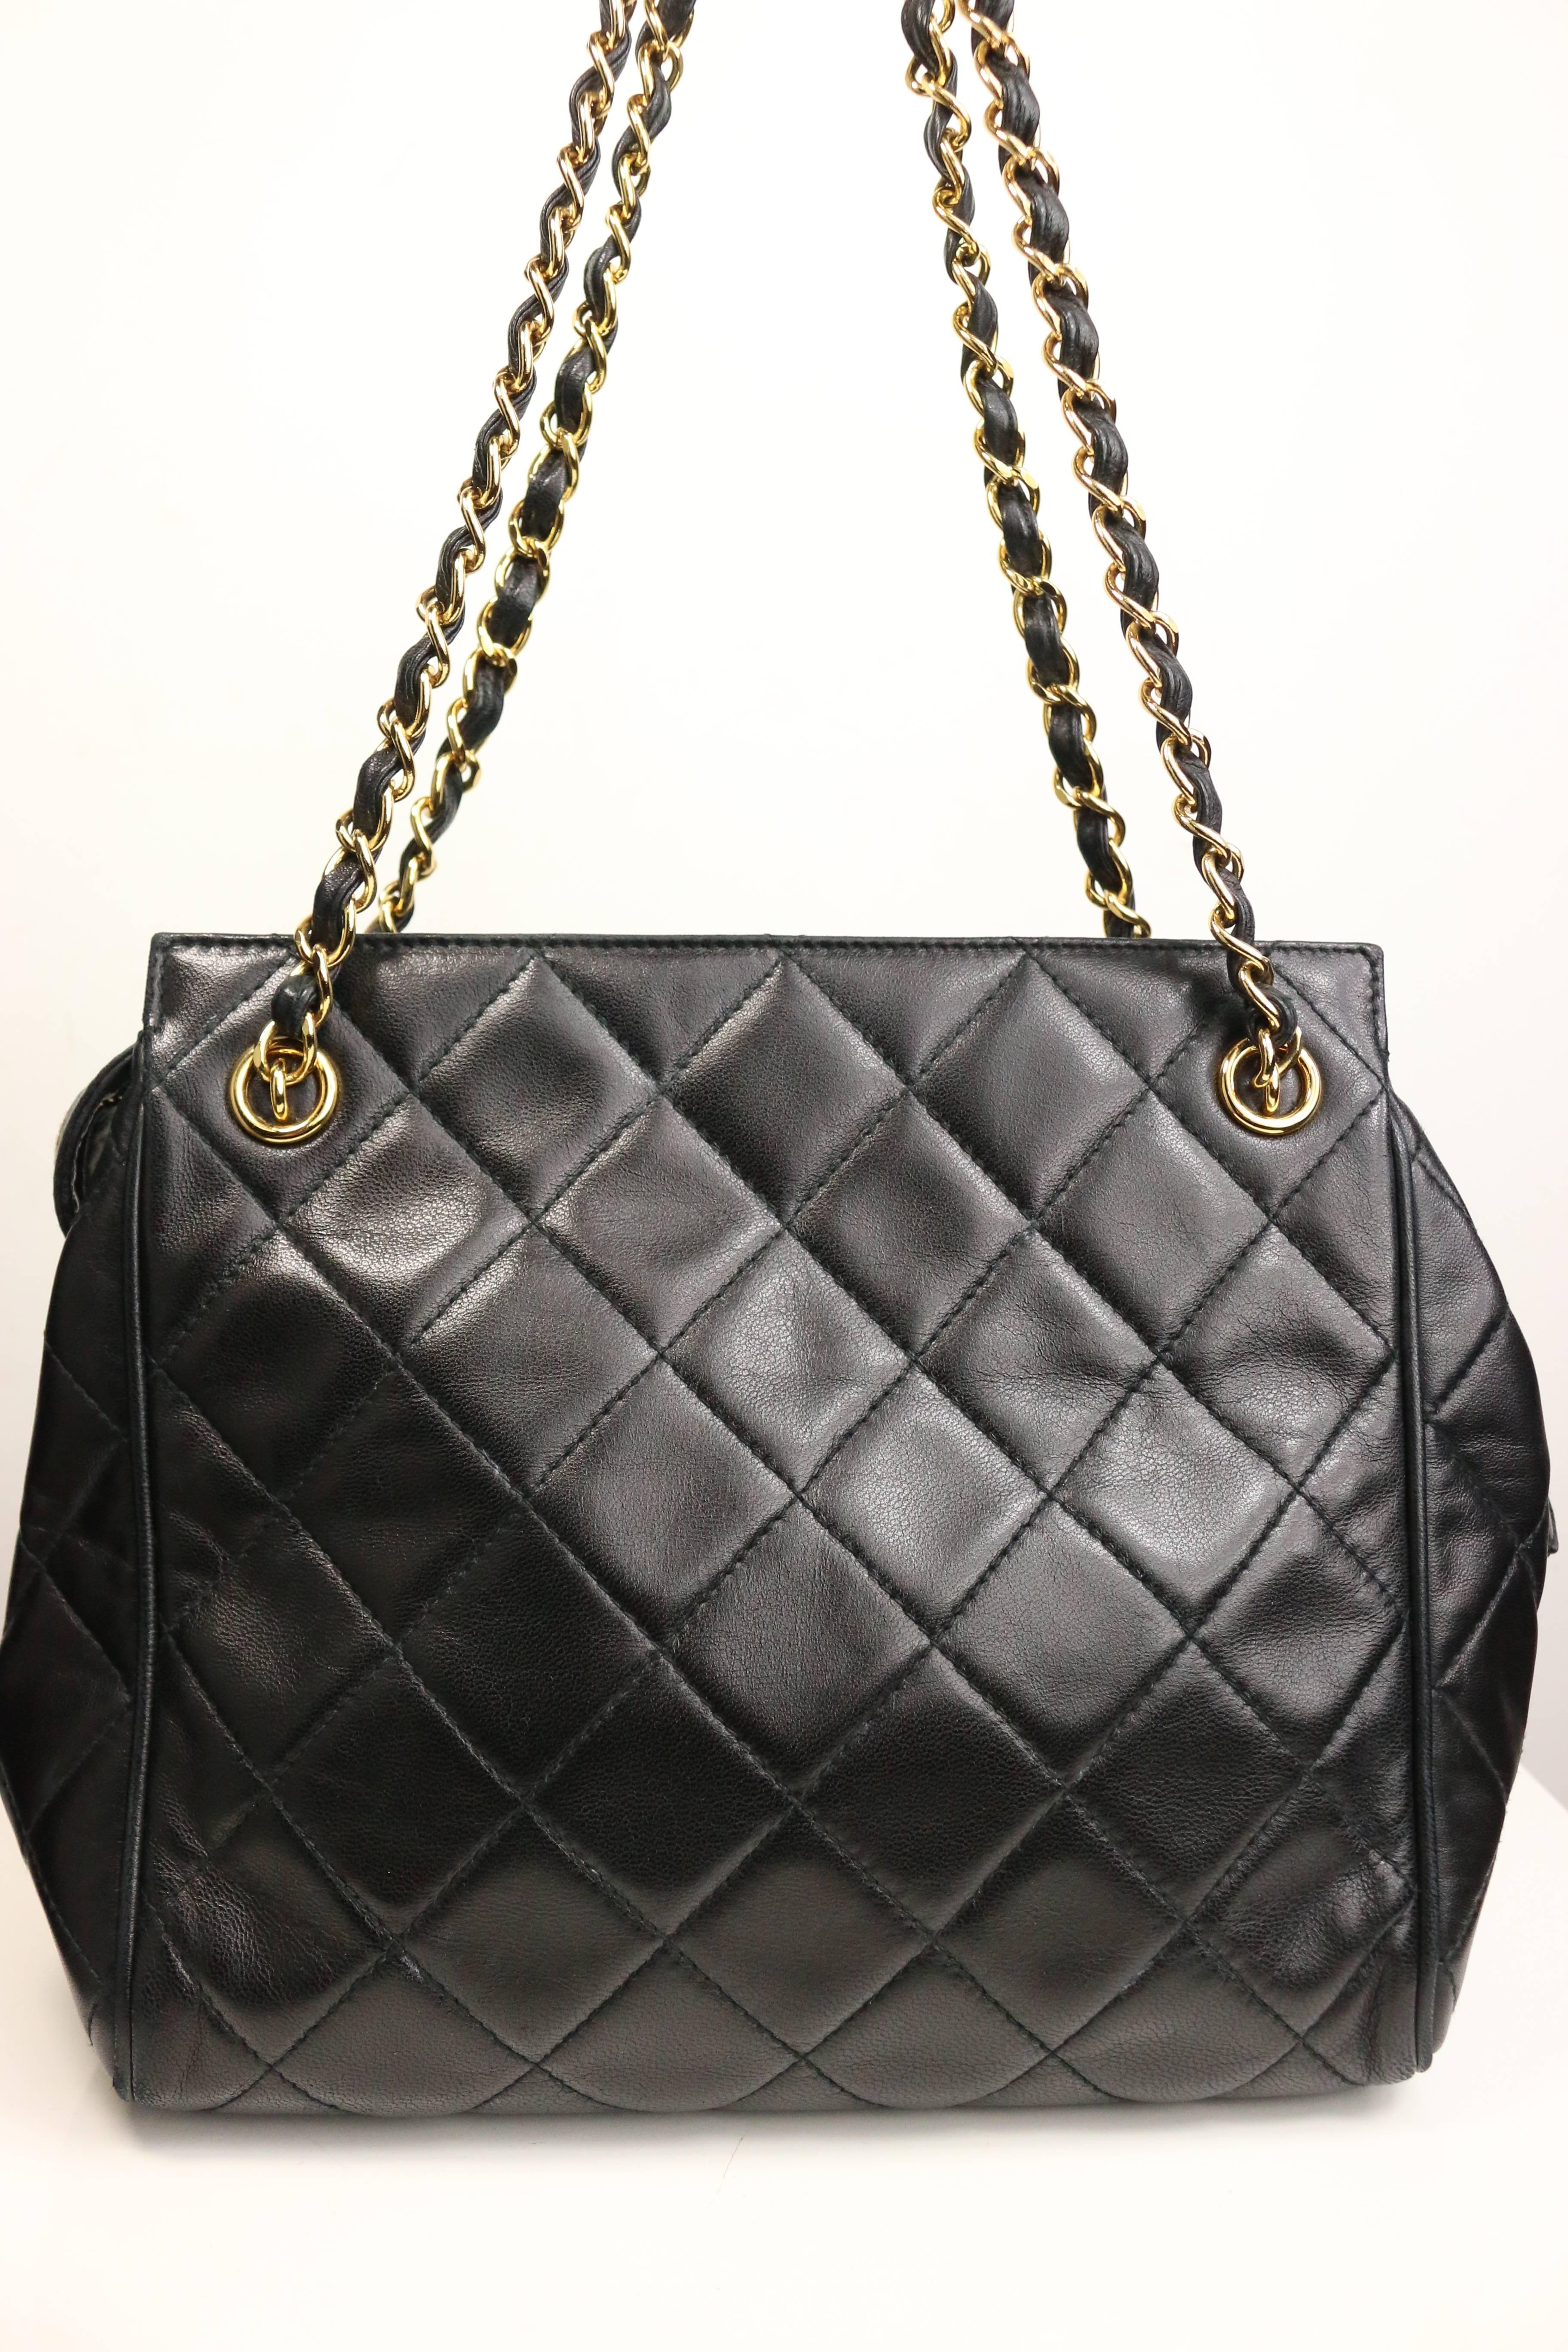 - Vintage 90s Chanel black quilted lambskin leather petite timeless shoulder strap tote. Featuring a gold toned leather chain double straps and a snap button with gold toned "Chanel" zipper closure. The interior has one zipper pocket and